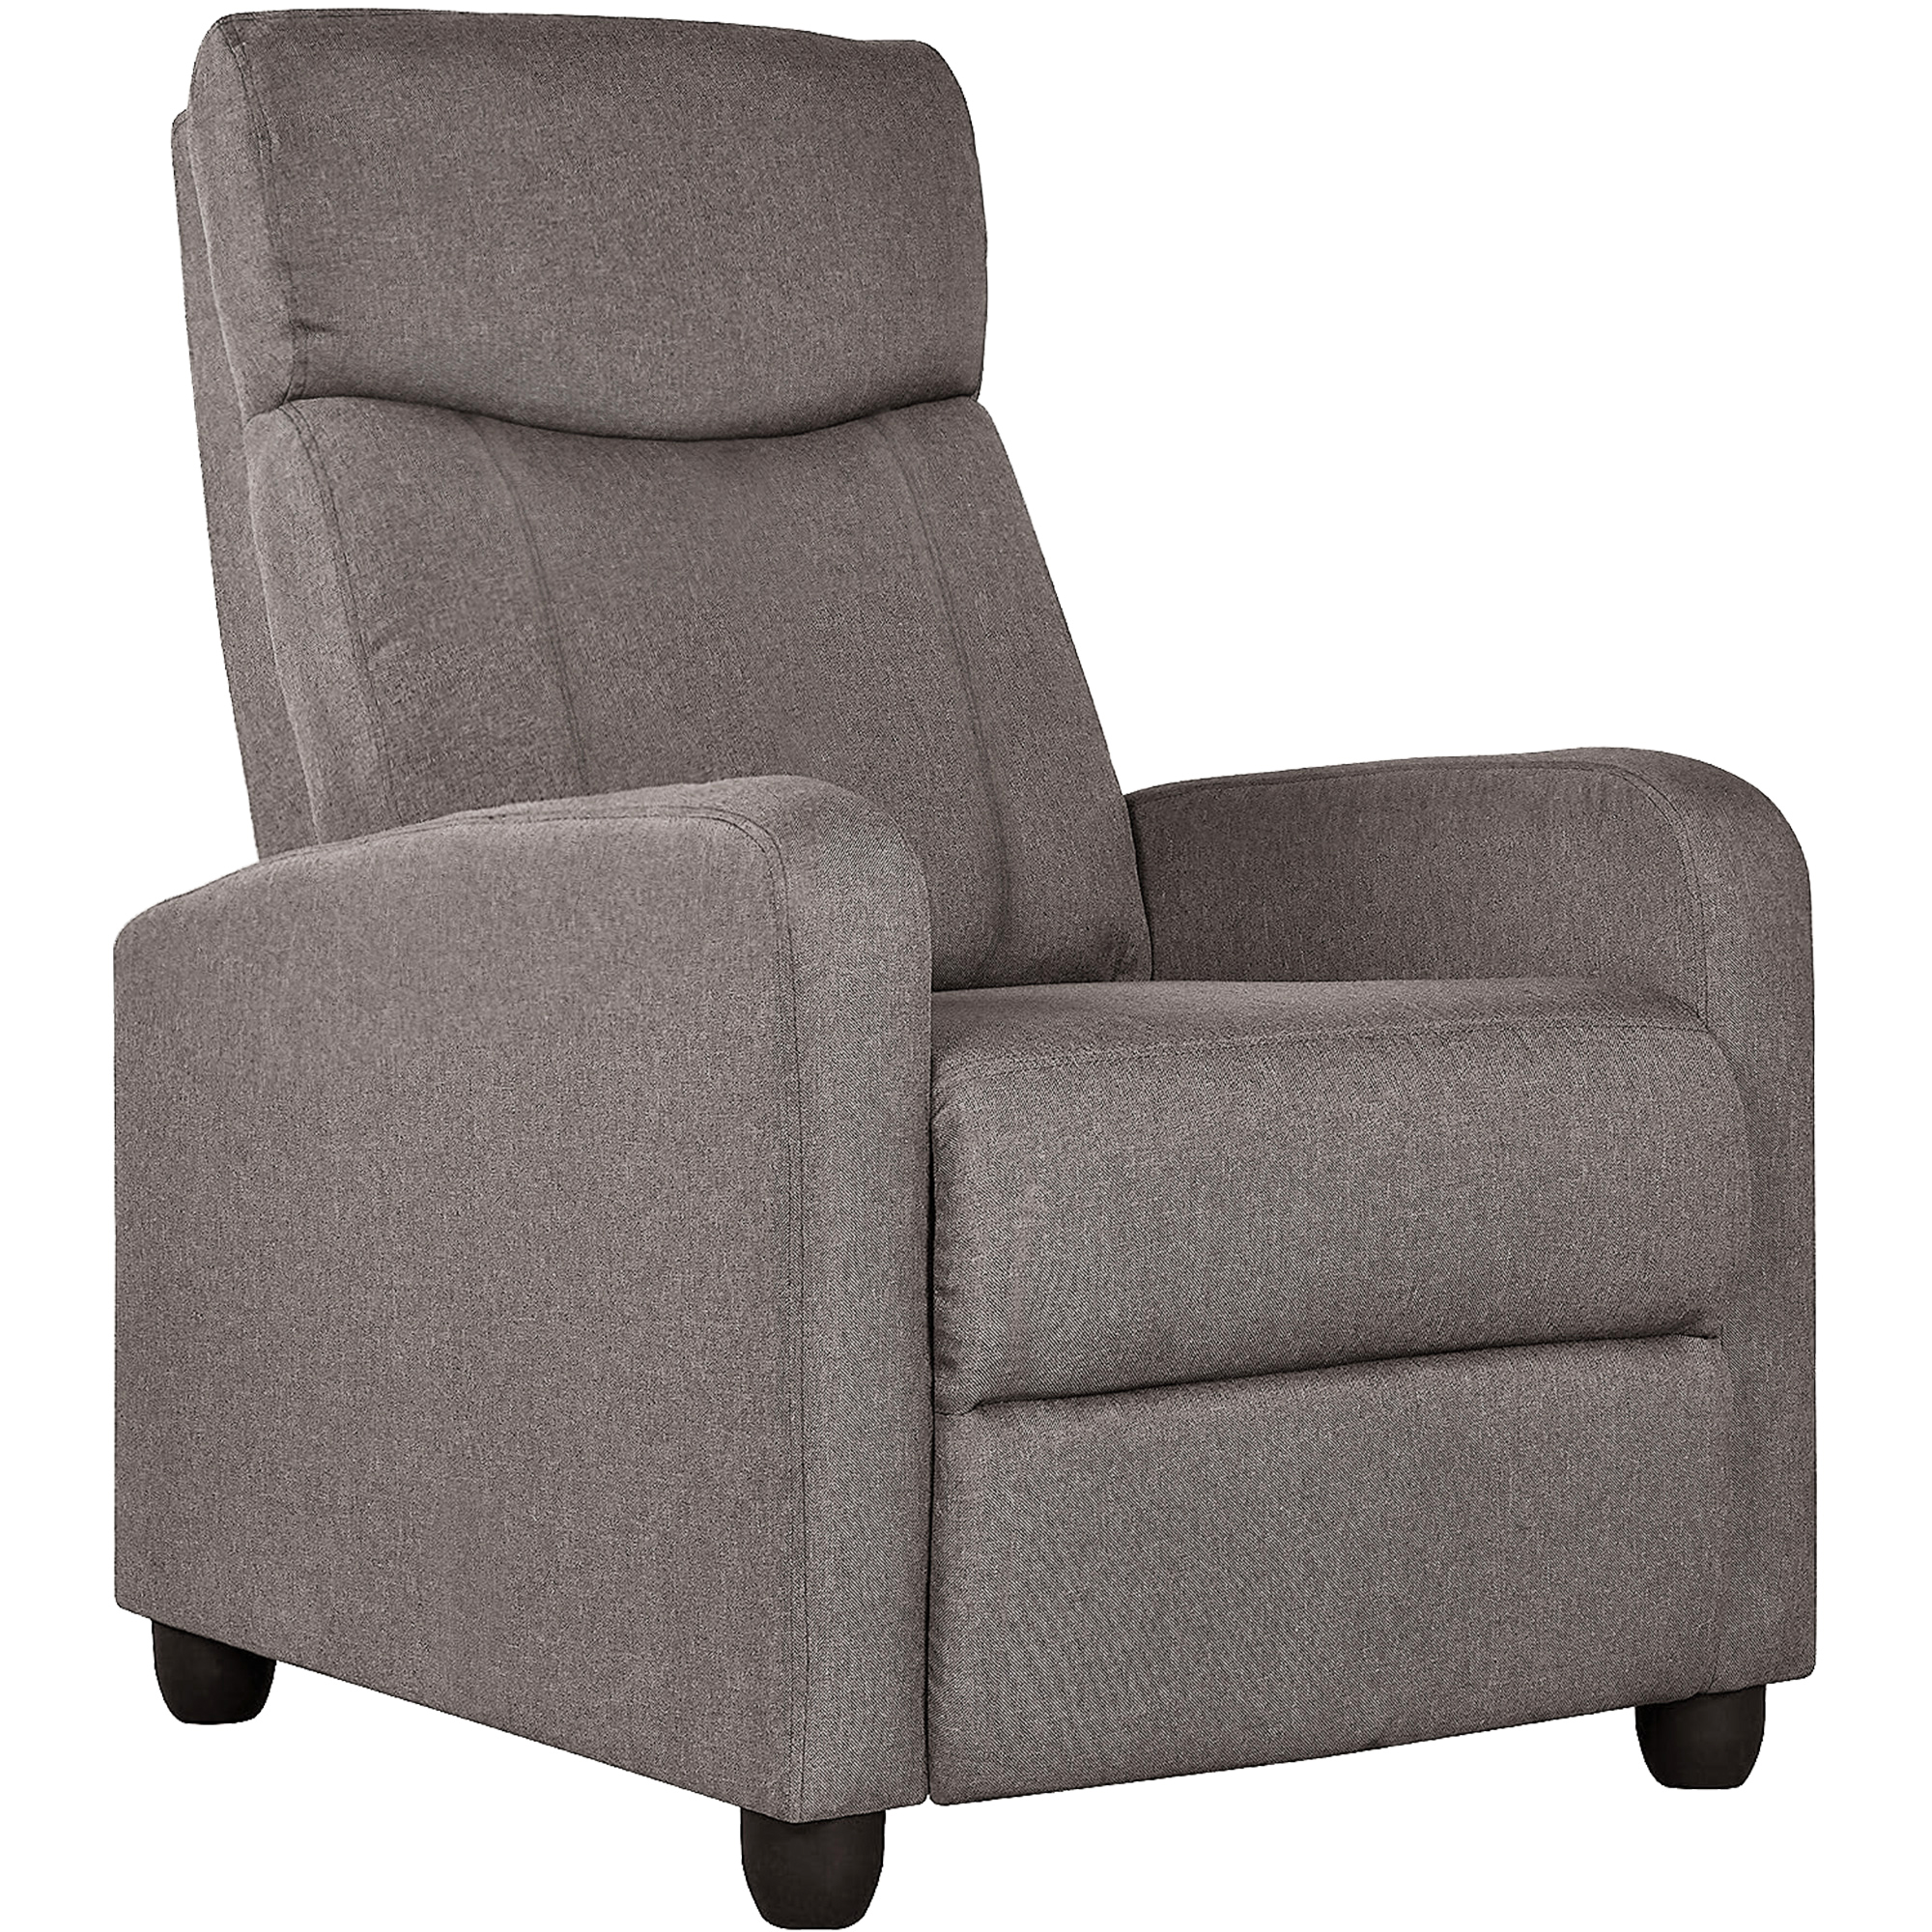 Comhoma Push Back Theater Adjustable Recliner with Footrest, Grey Fabric - image 1 of 8